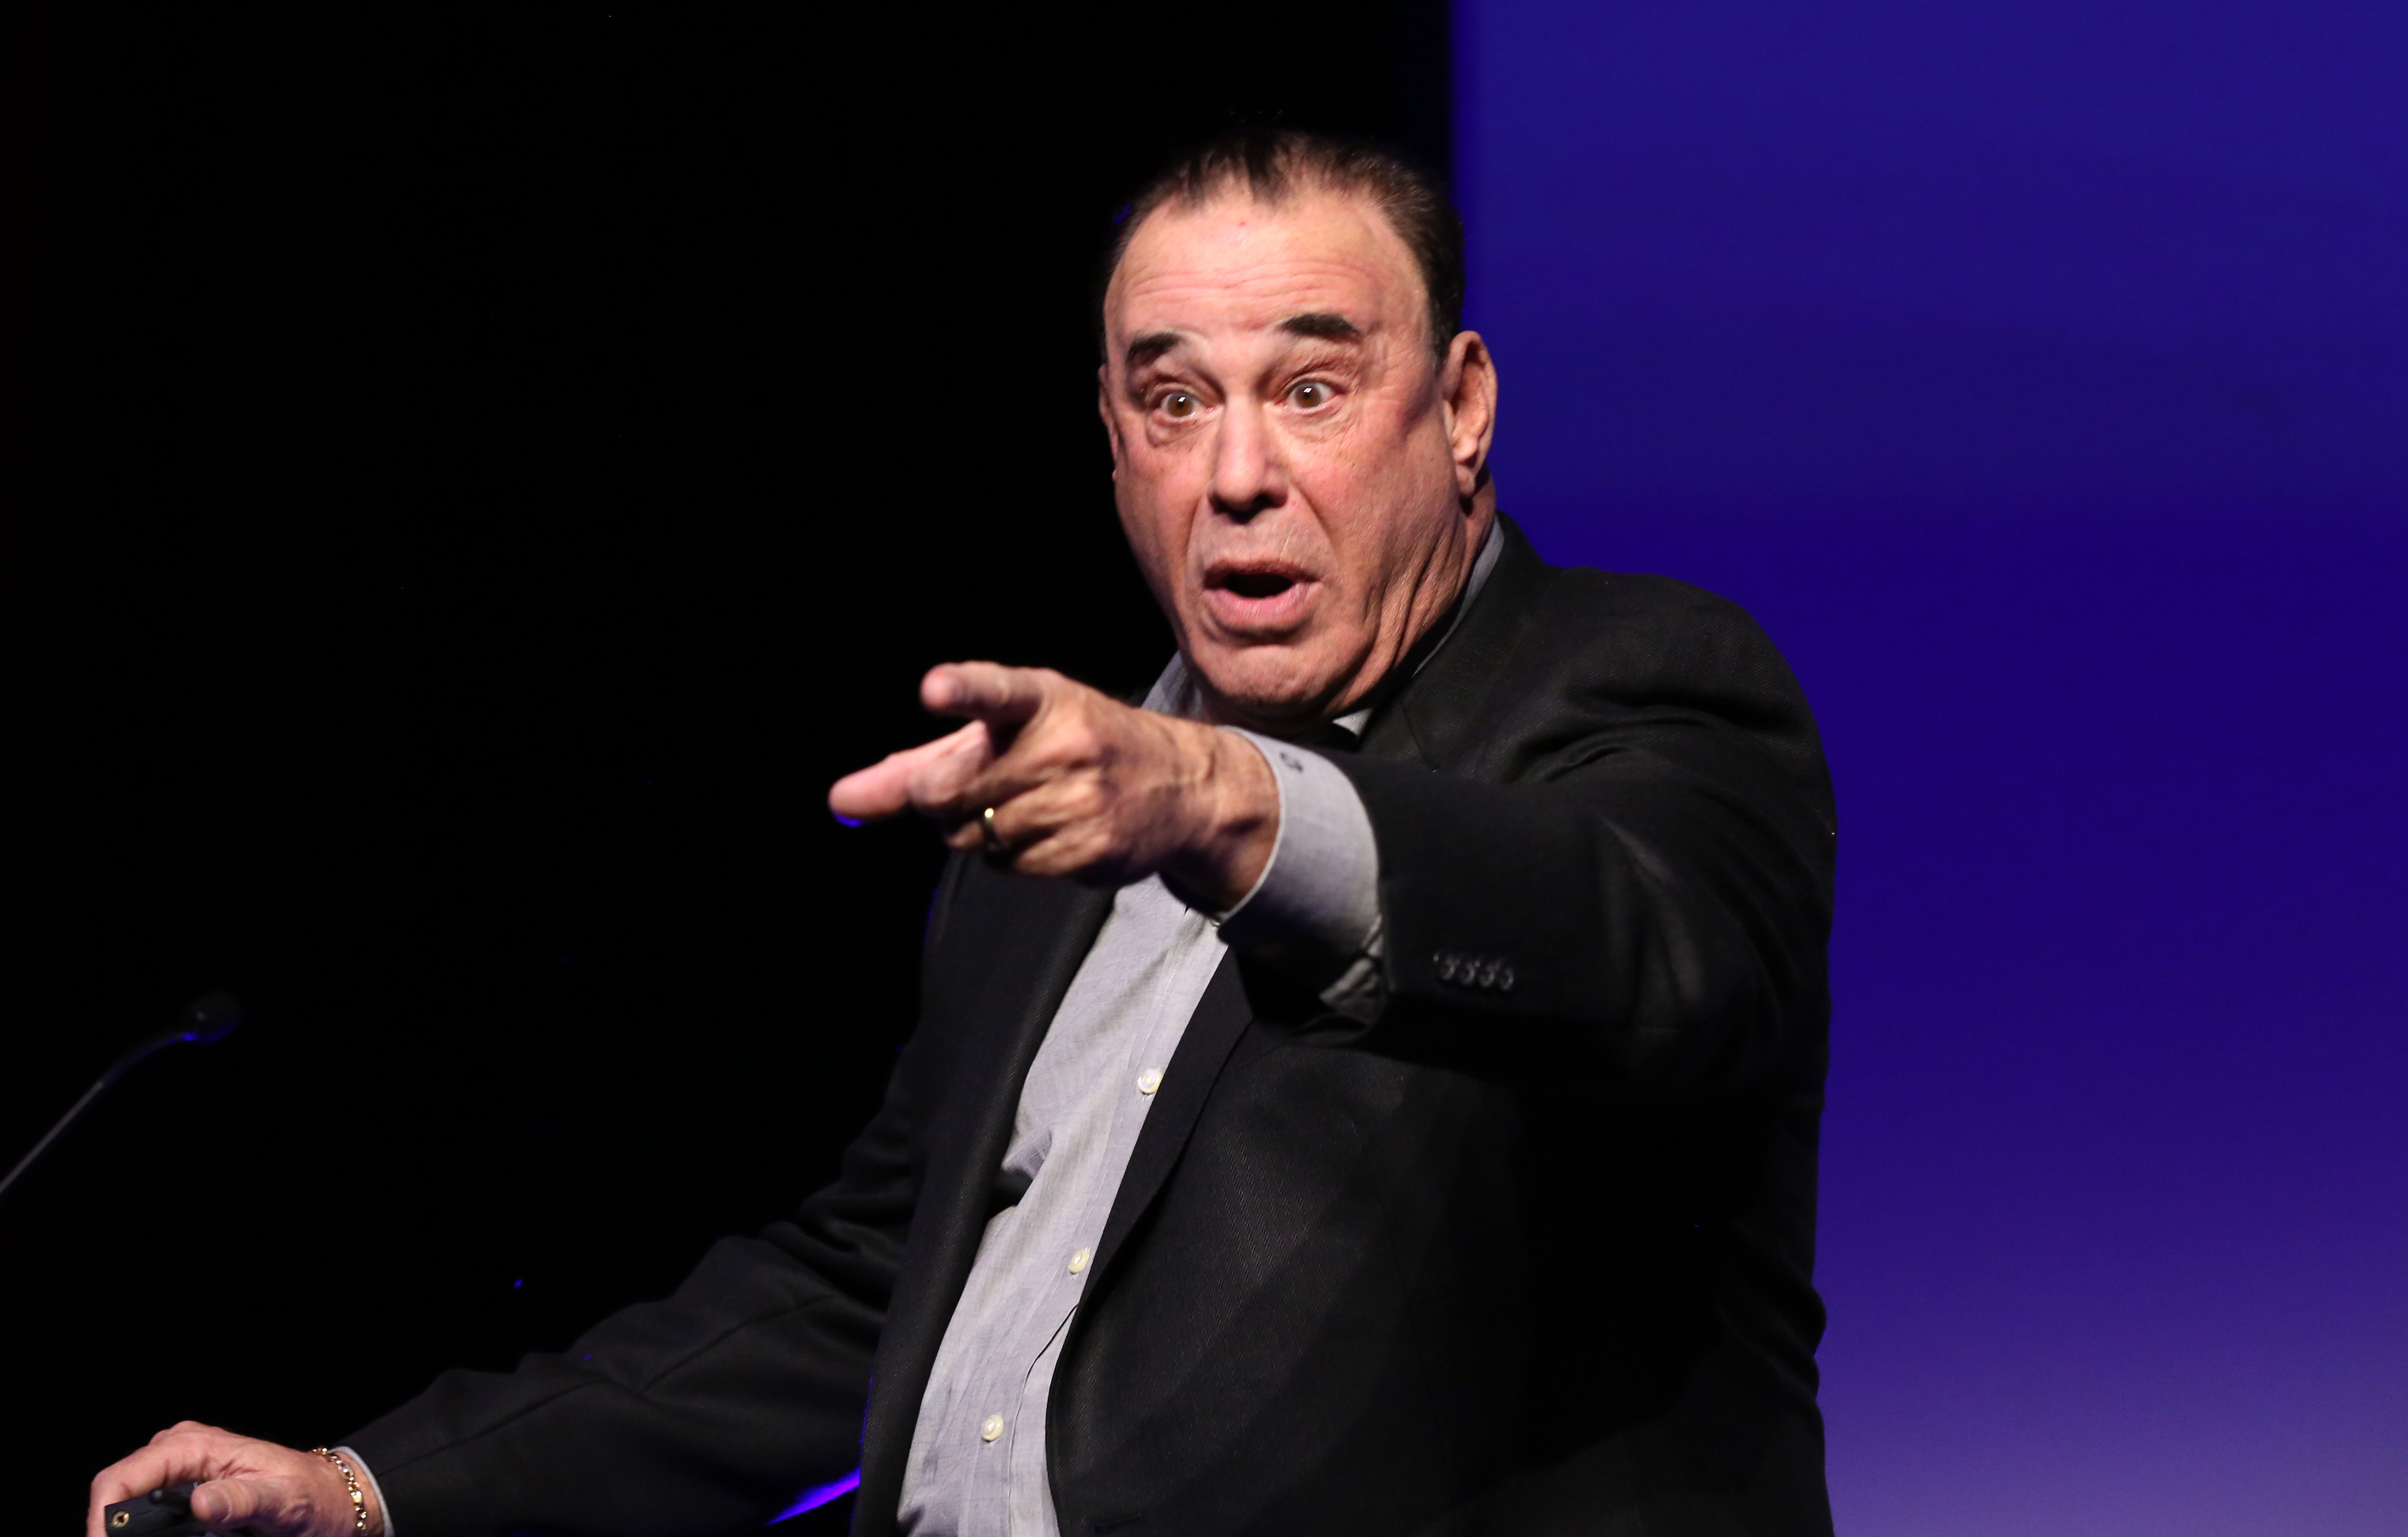 Nightclub &amp; Bar Media Group President, host and Co-Executive Producer of the Spike television show "Bar Rescue" Jon Taffer speaks during the G.R.O.W. - Guest Reaction Opportunity Window panel at Caesars Palace during CinemaCon, the official convention of the National Association of Theatre Owners on April 01, 2019 in Las Vegas, Nevada.